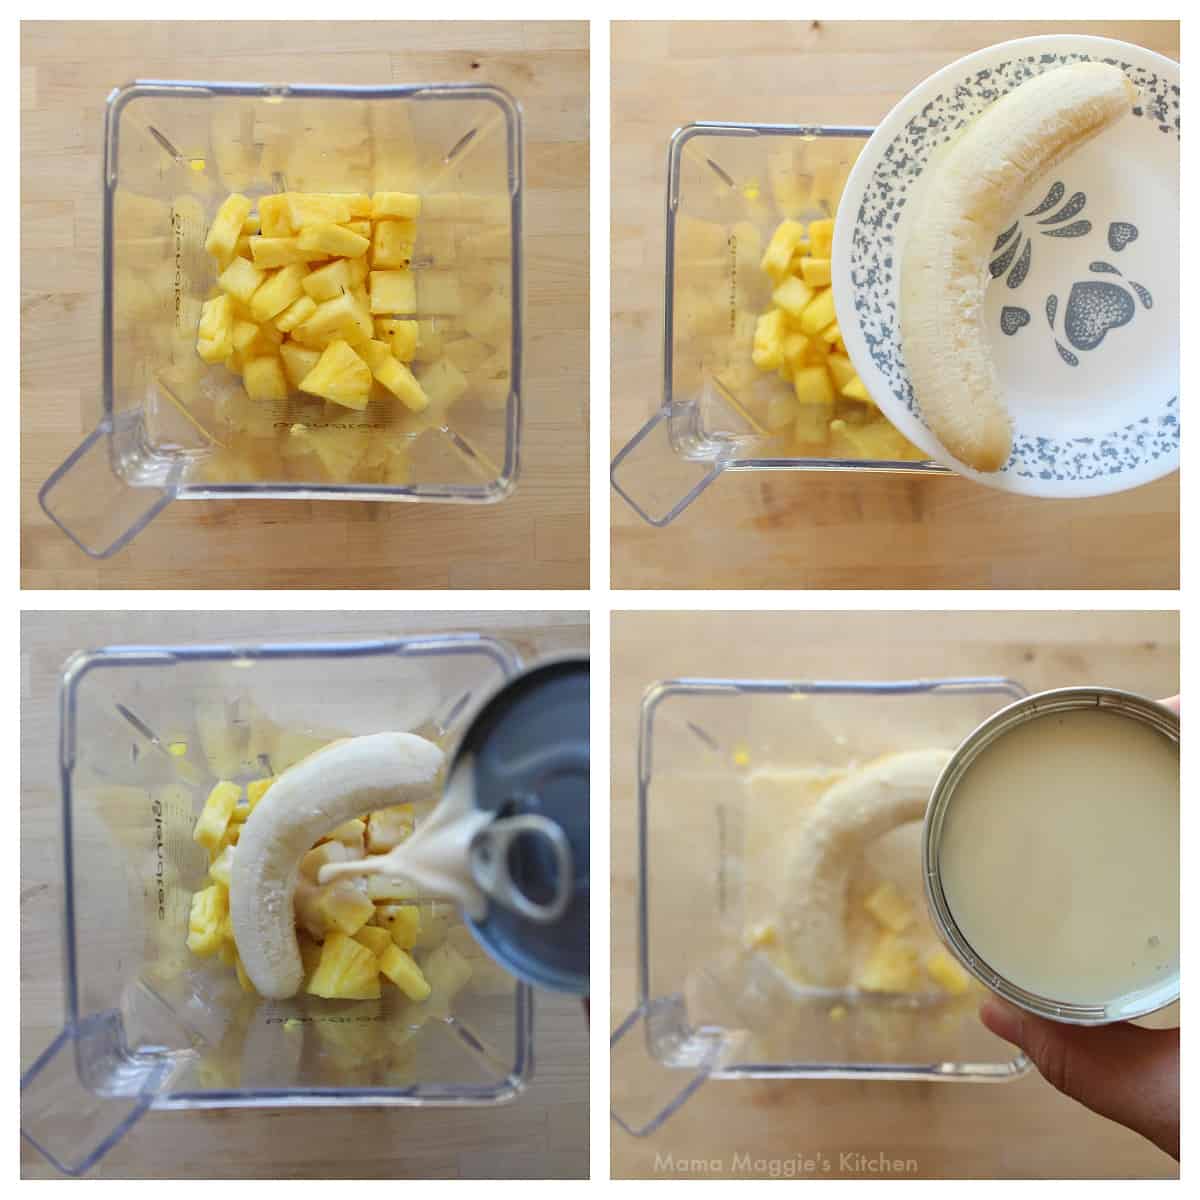 A collage showing how to make pineapple banana agua fresca.